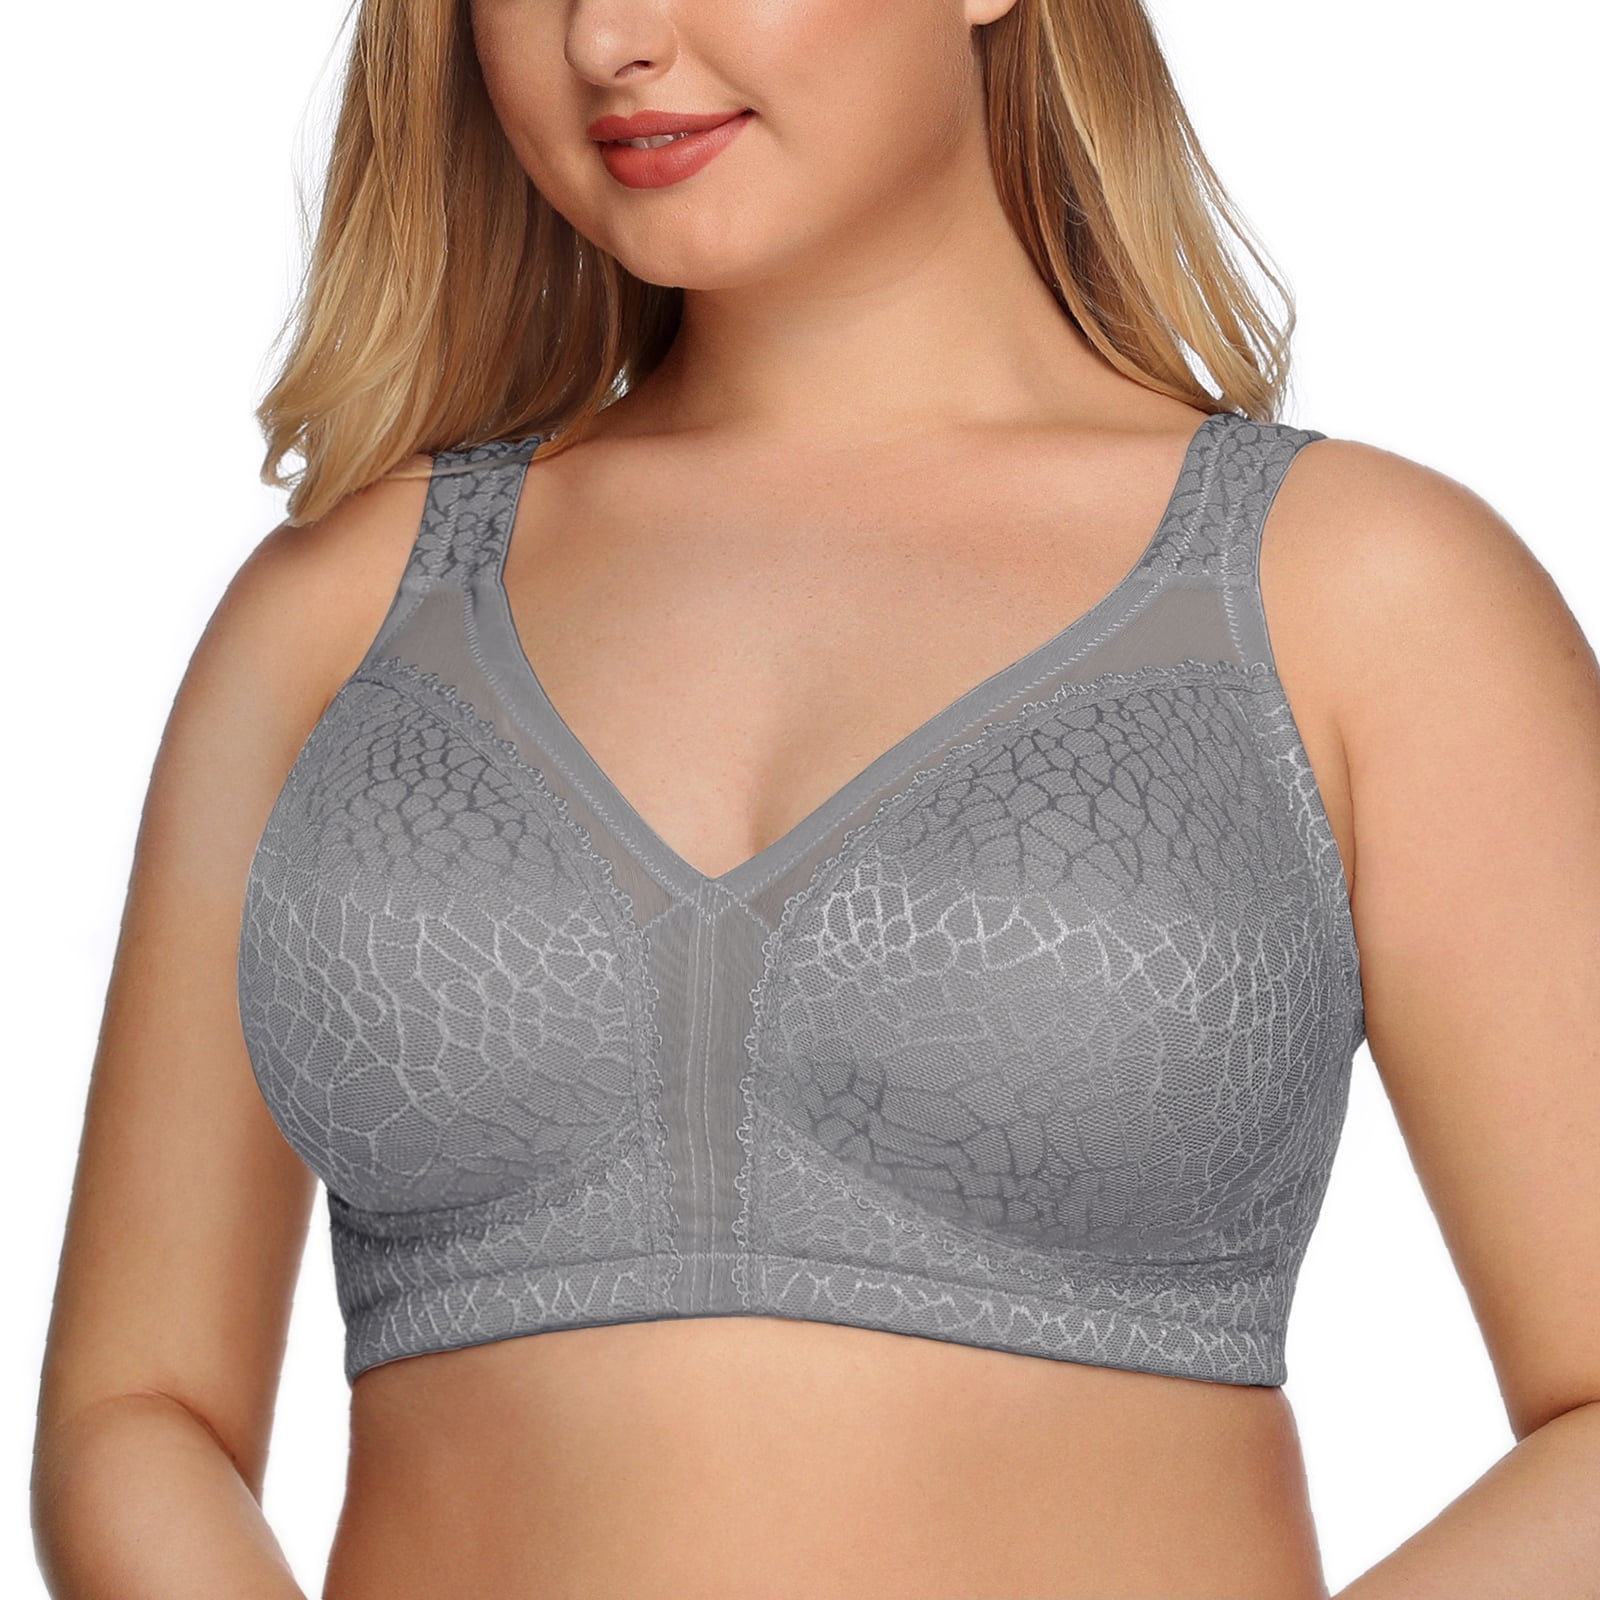 Exclare Women's Plus Size Comfort Full Coverage Double Support